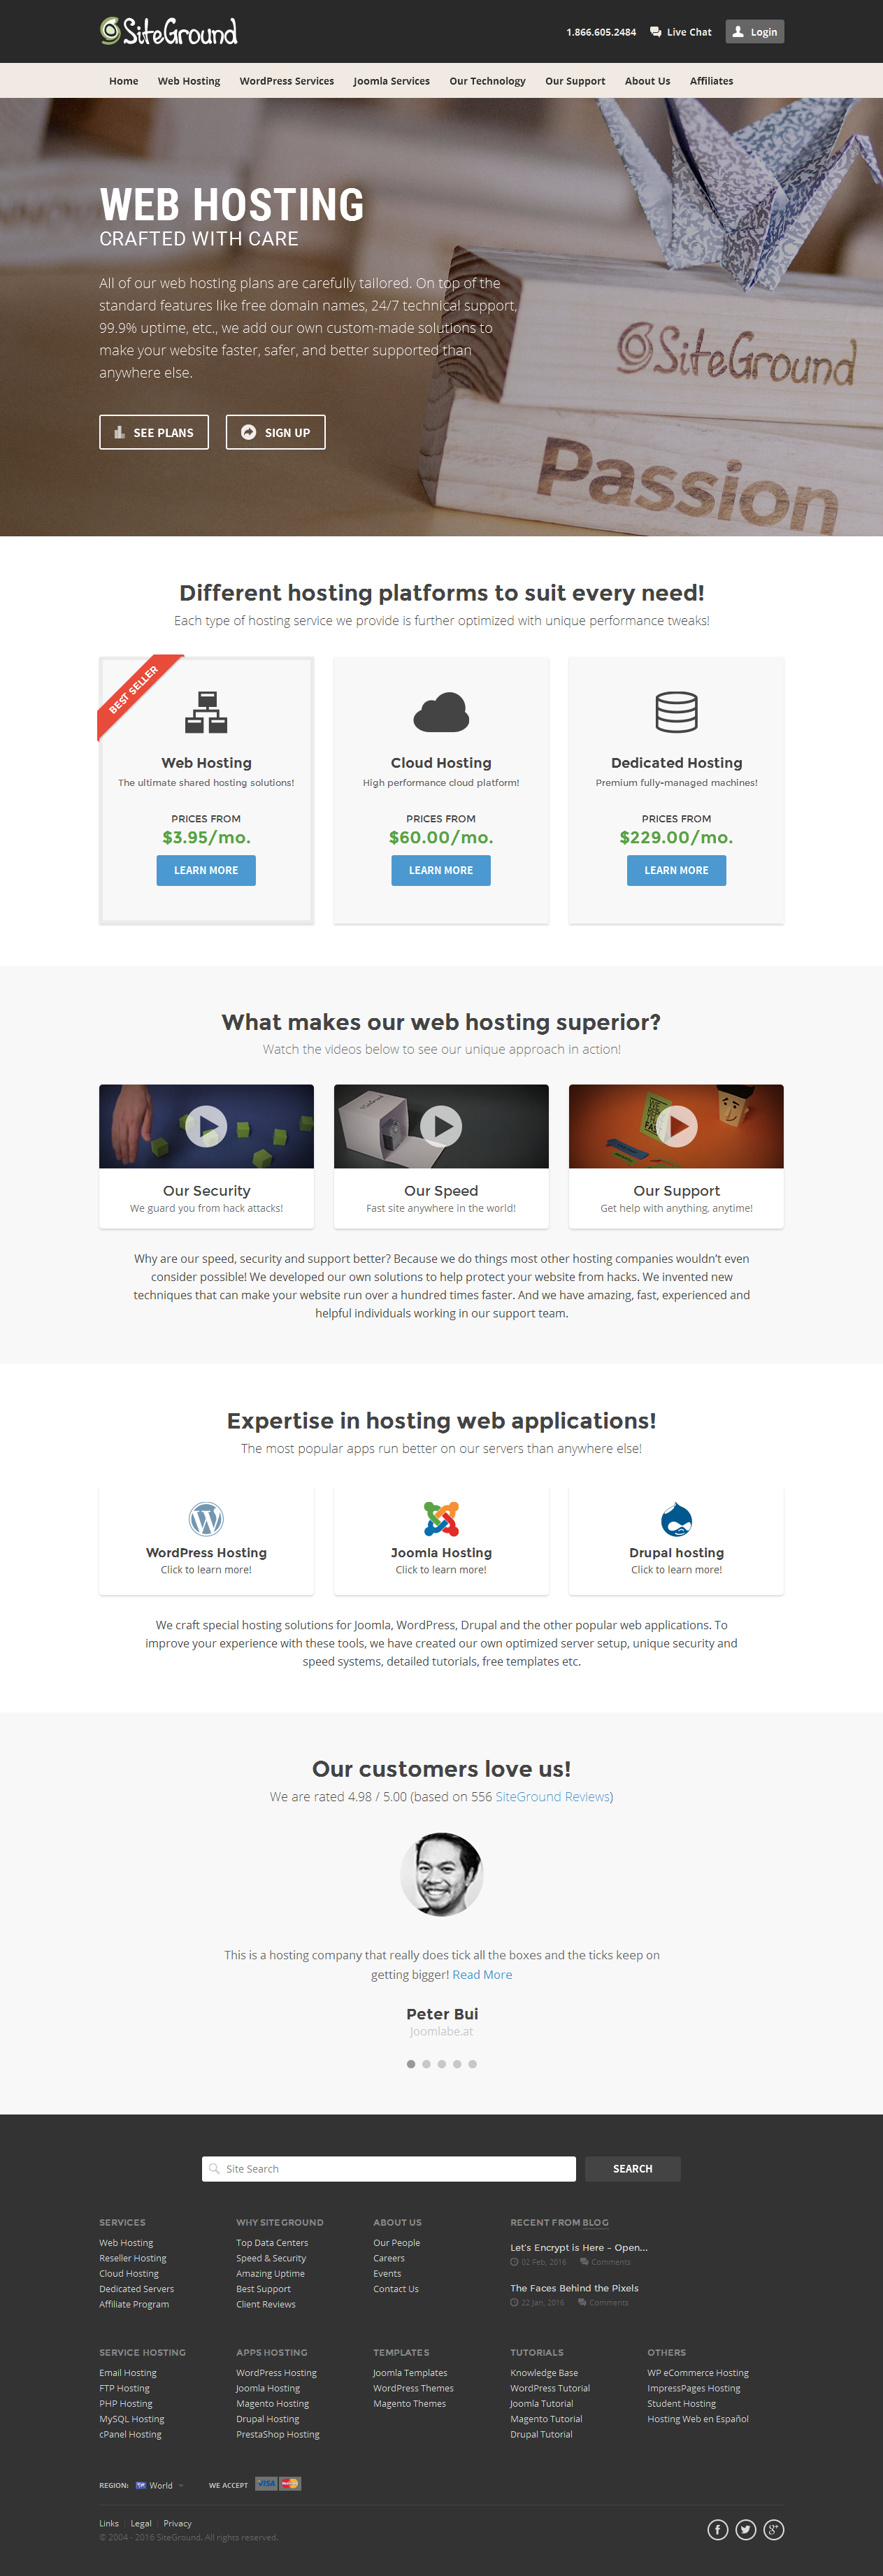 SiteGround- Quality-Crafted Hosting Services - falconhive